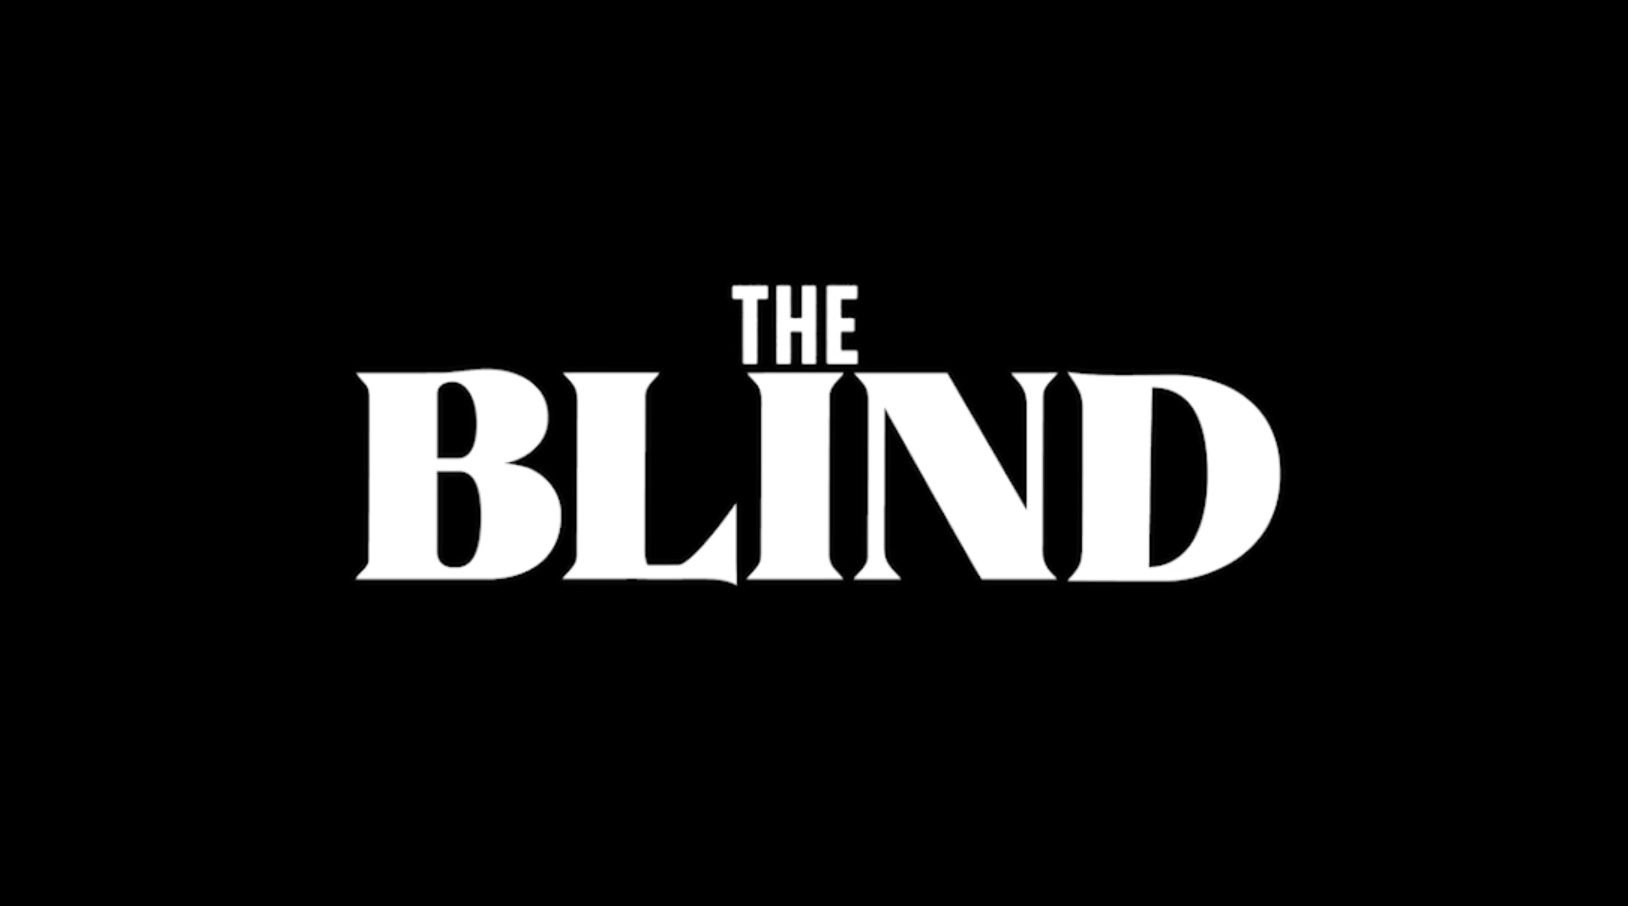 Box Office: "The Blind" Surprises, But Is It Pointing Us Towards the Conservative Star Rising?